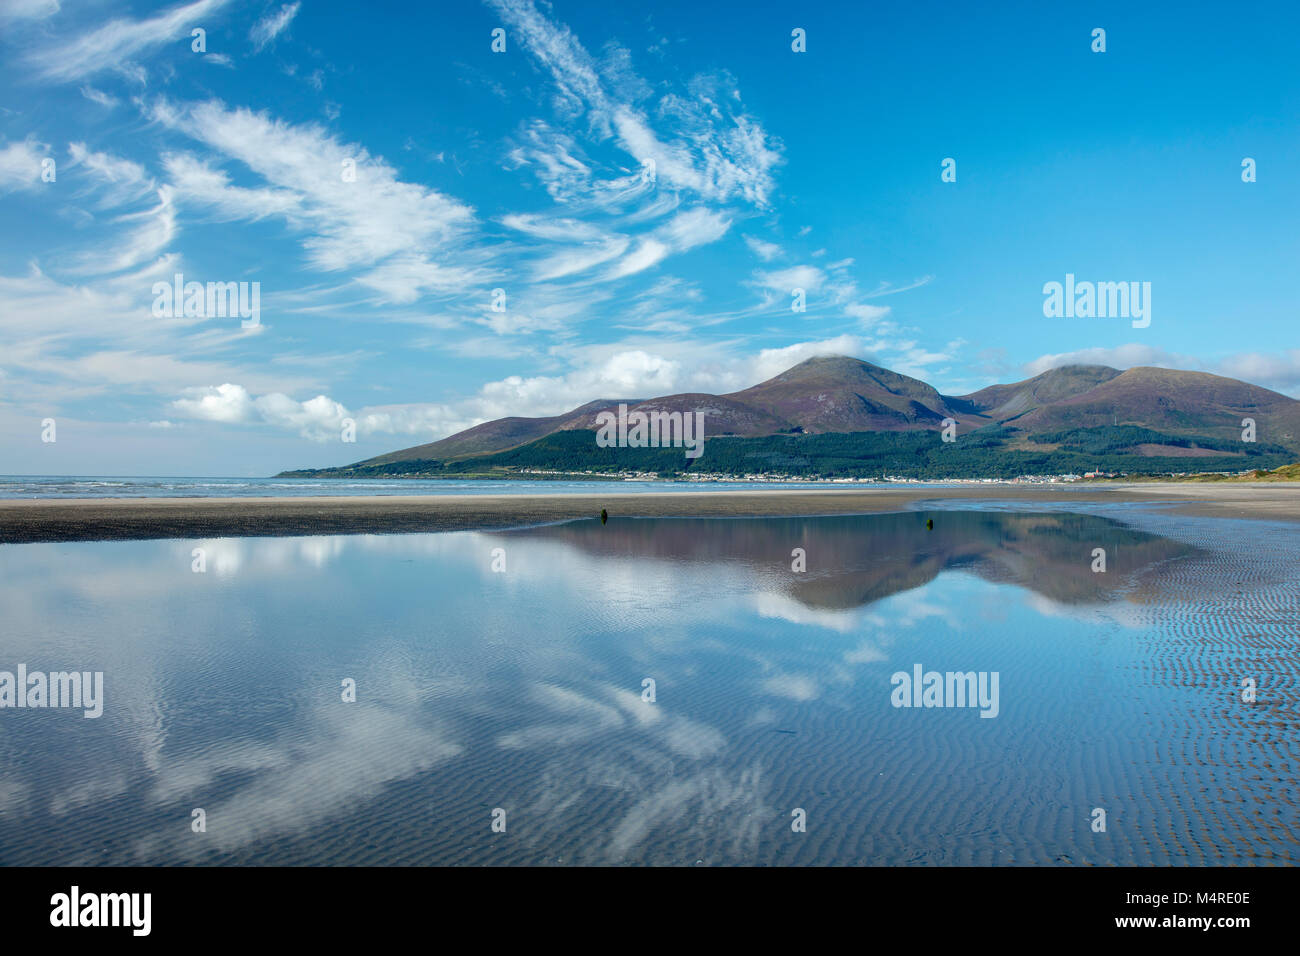 Mourne Mountains reflected in Murlough Beach, Murlough Nature Reserve, County Down, Northern Ireland. Stock Photo